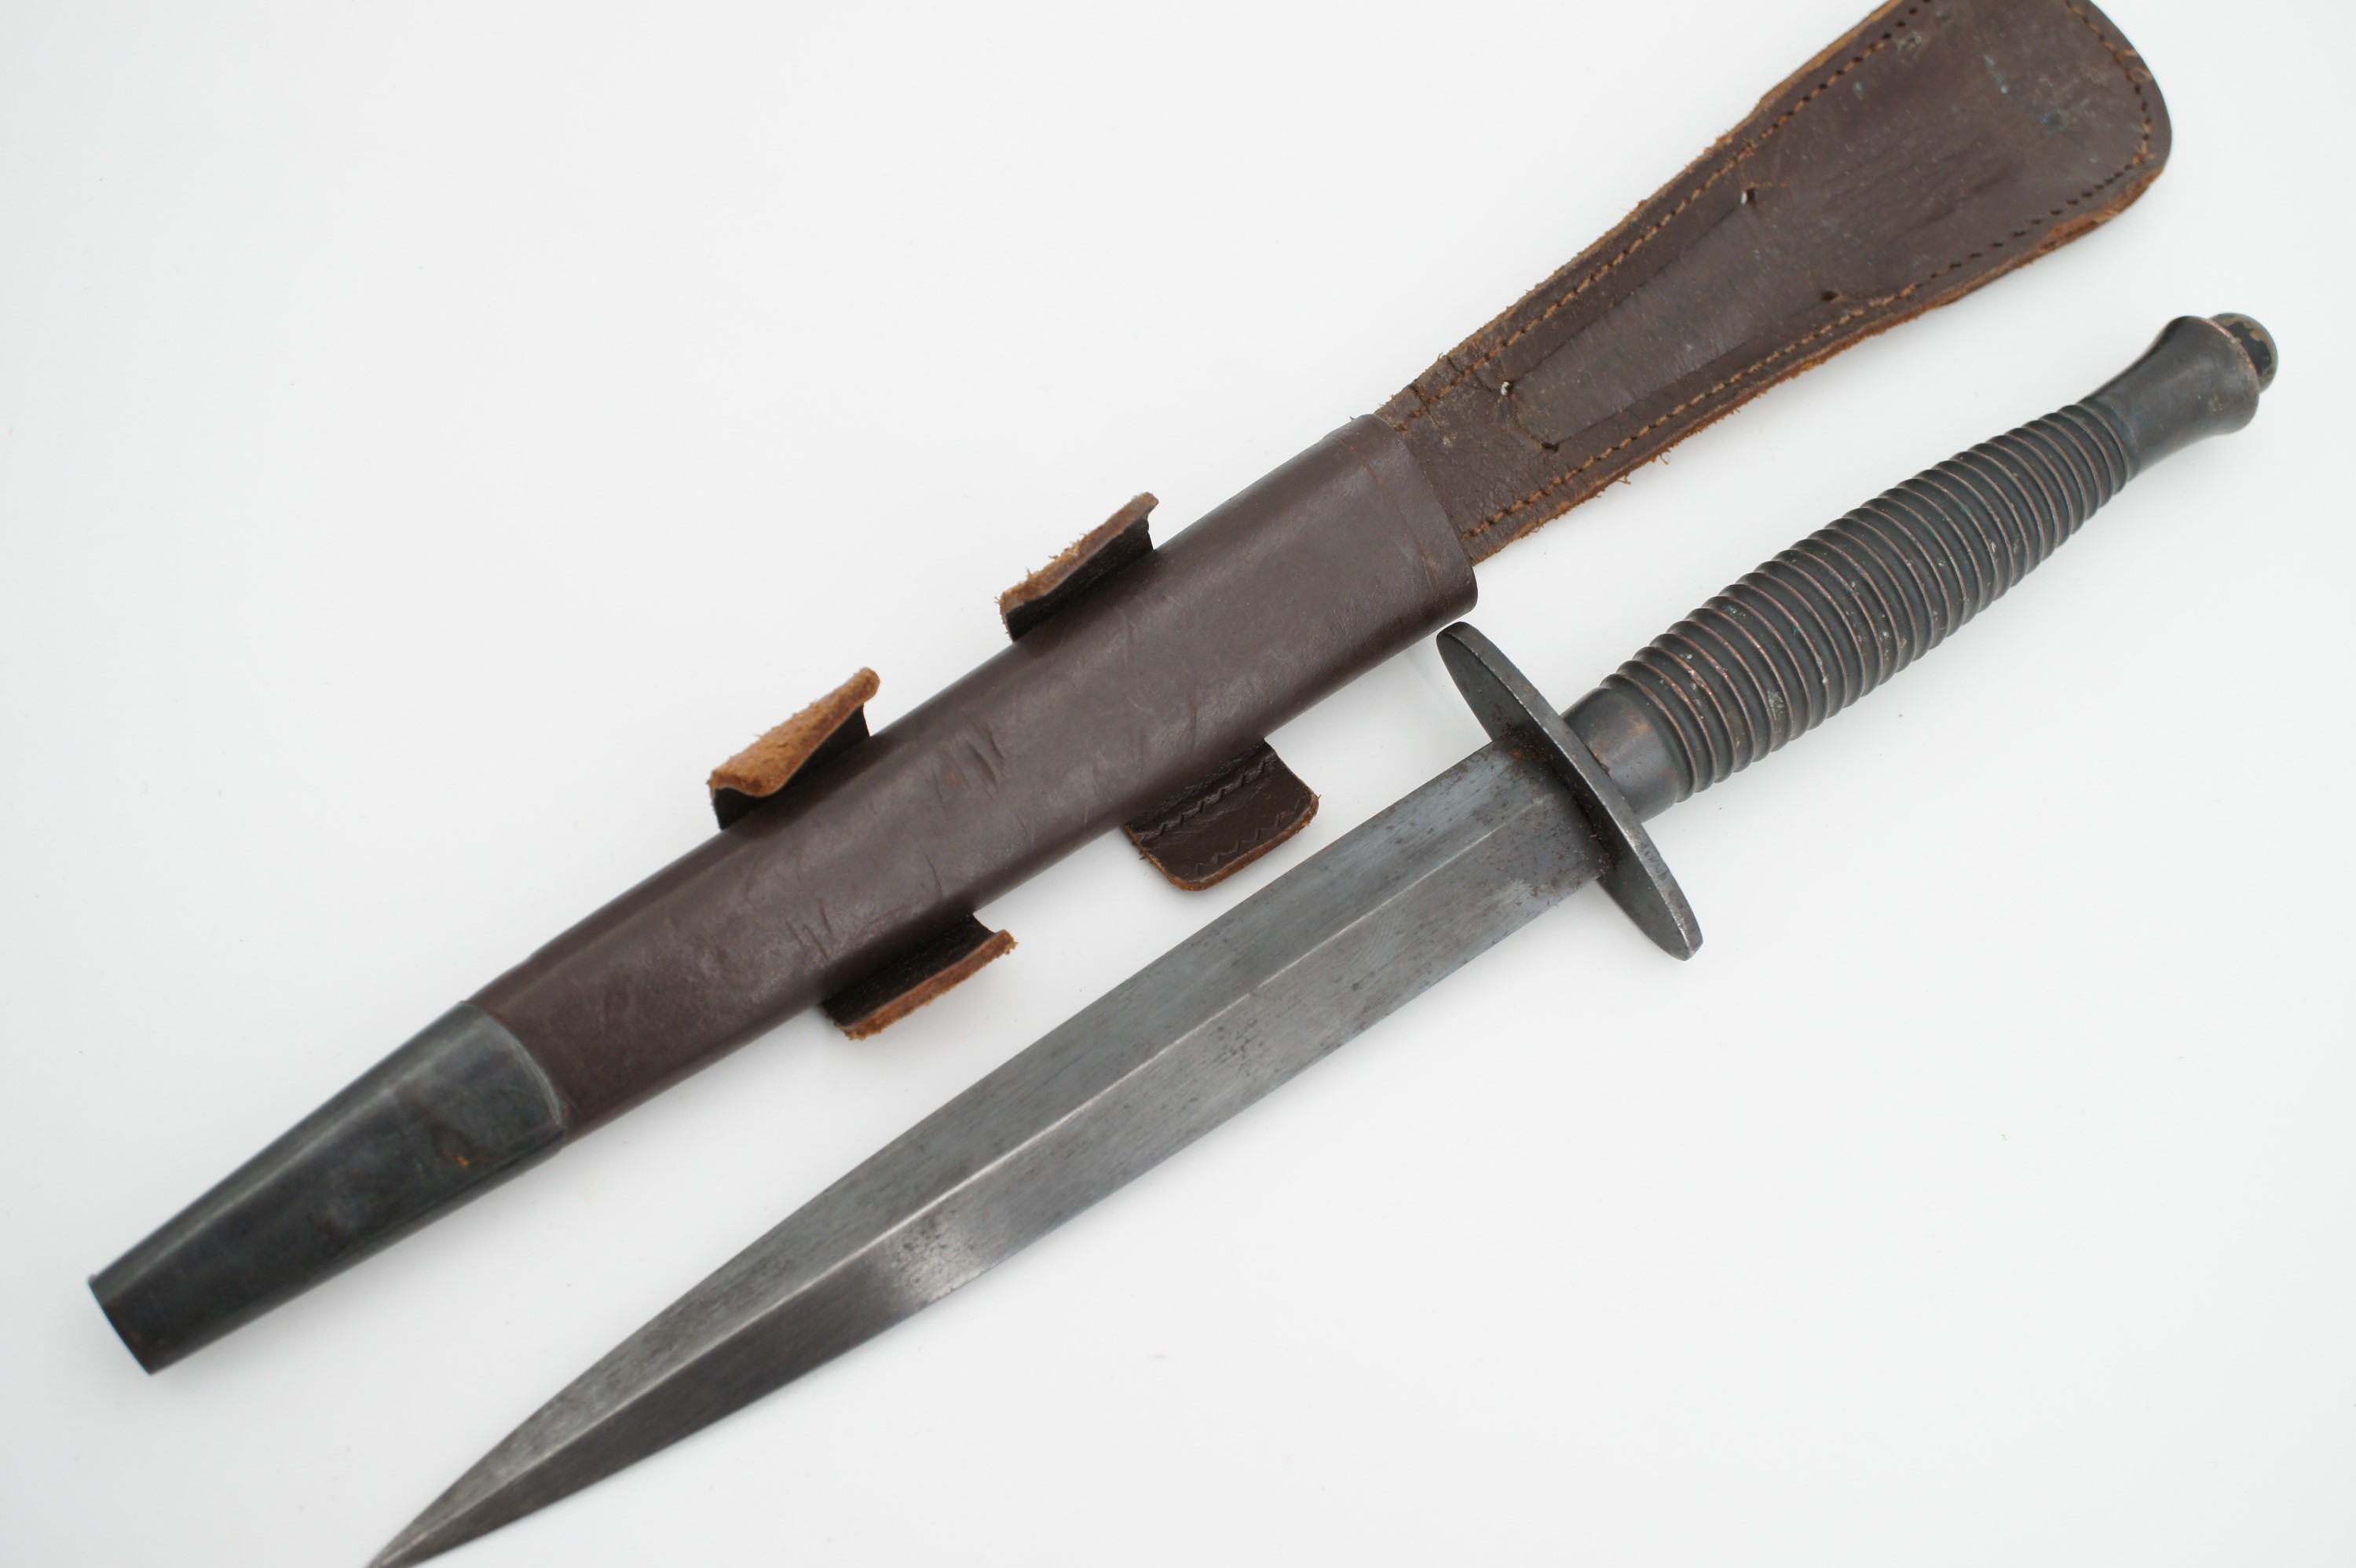 A Fairbairn Sykes / FS third pattern fighting knife, the grip bearing mould mark 3